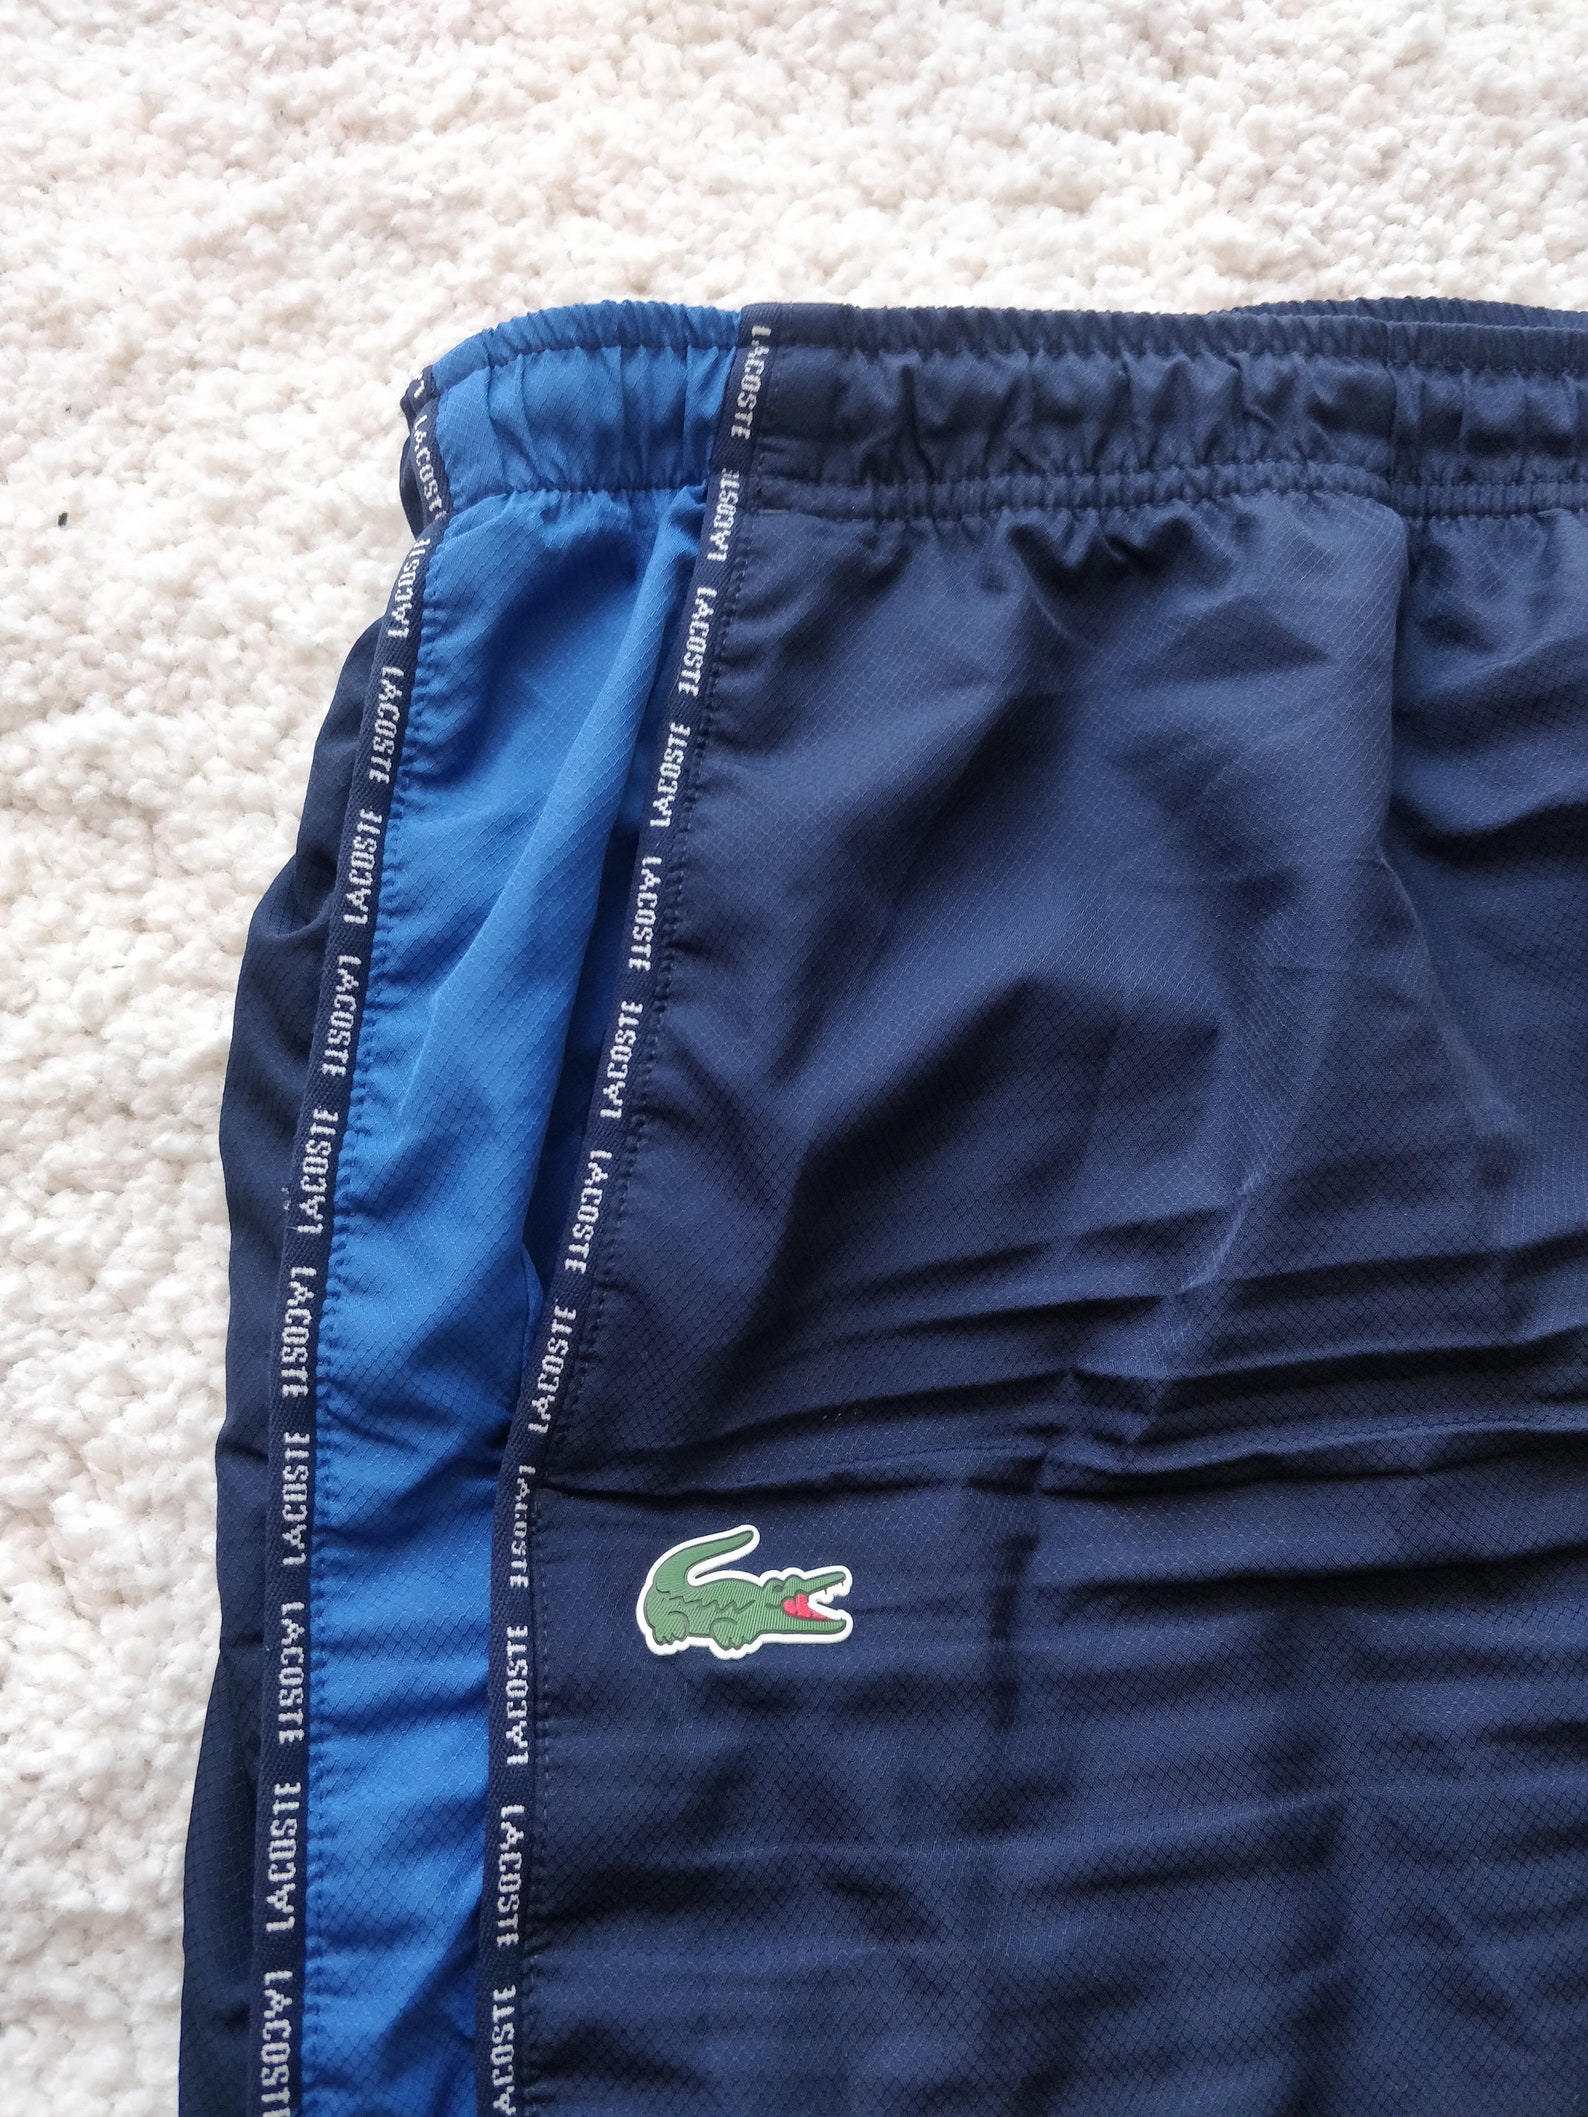 Lacoste Sport Vintage Mens Track Pants Trousers Navy Blue Hype | Etsy